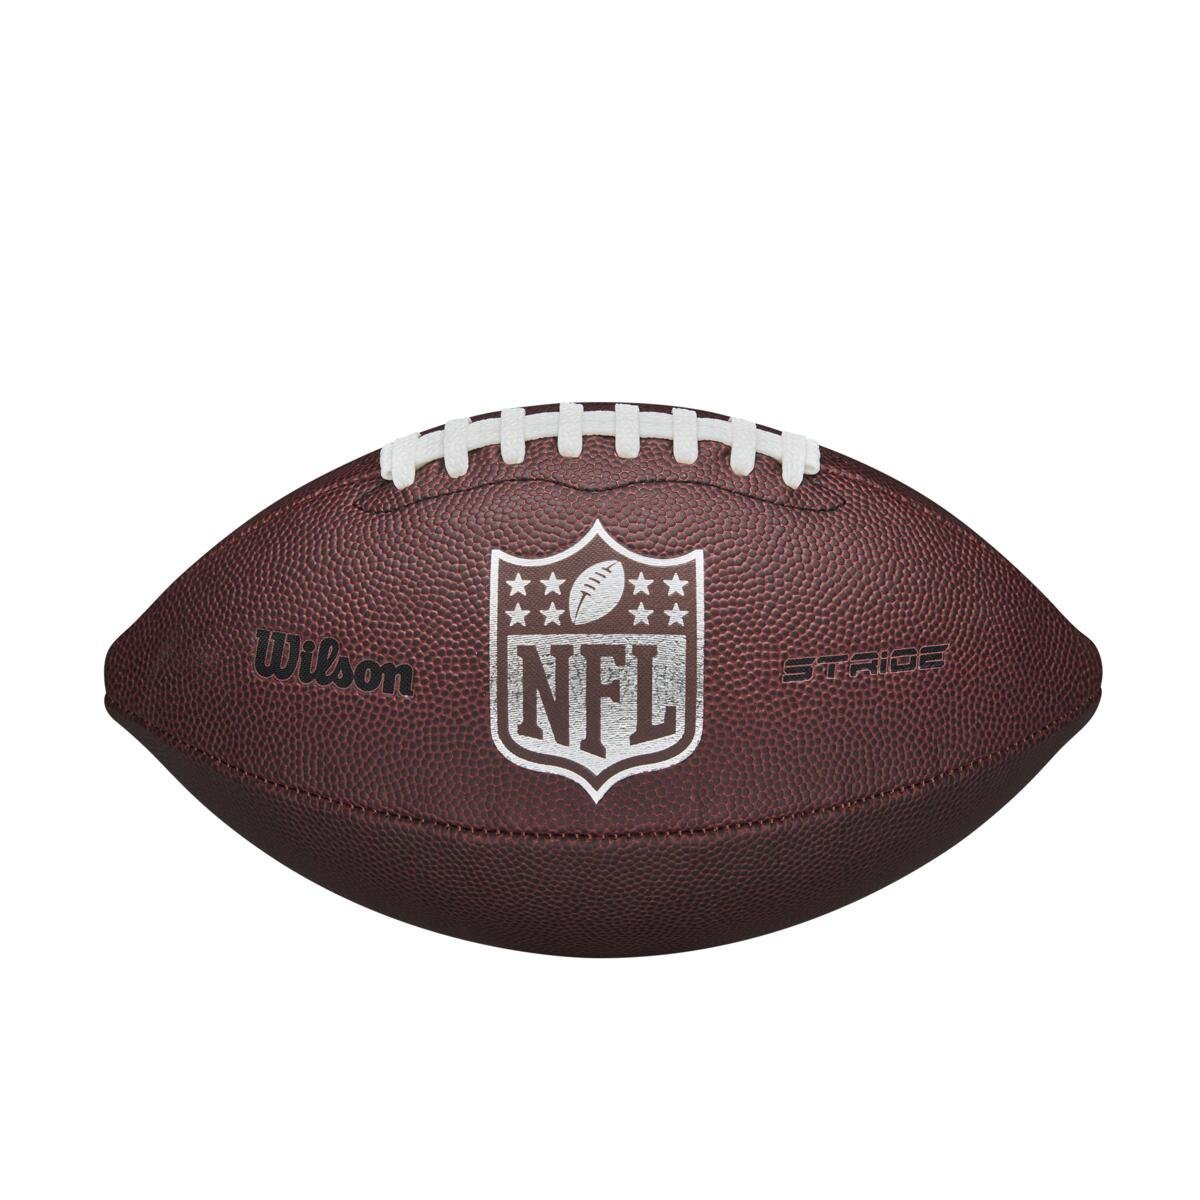 WF3007201XB_0_OF_NFL_Stride_Football_Official_BR.png.cq5dam.web.1200.1200